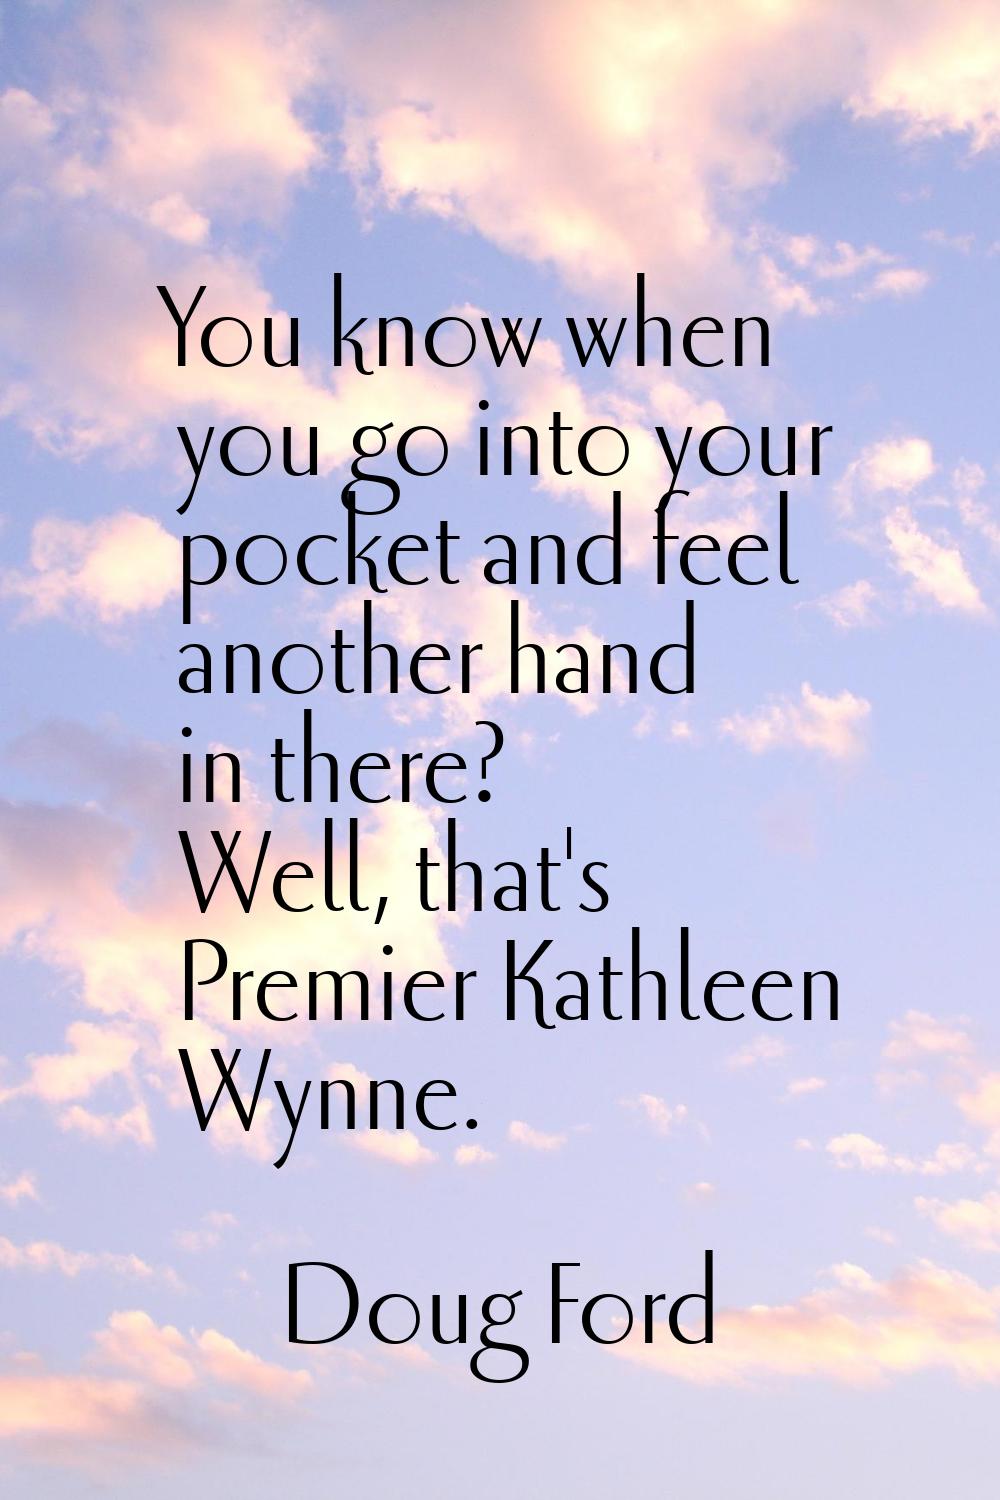 You know when you go into your pocket and feel another hand in there? Well, that's Premier Kathleen